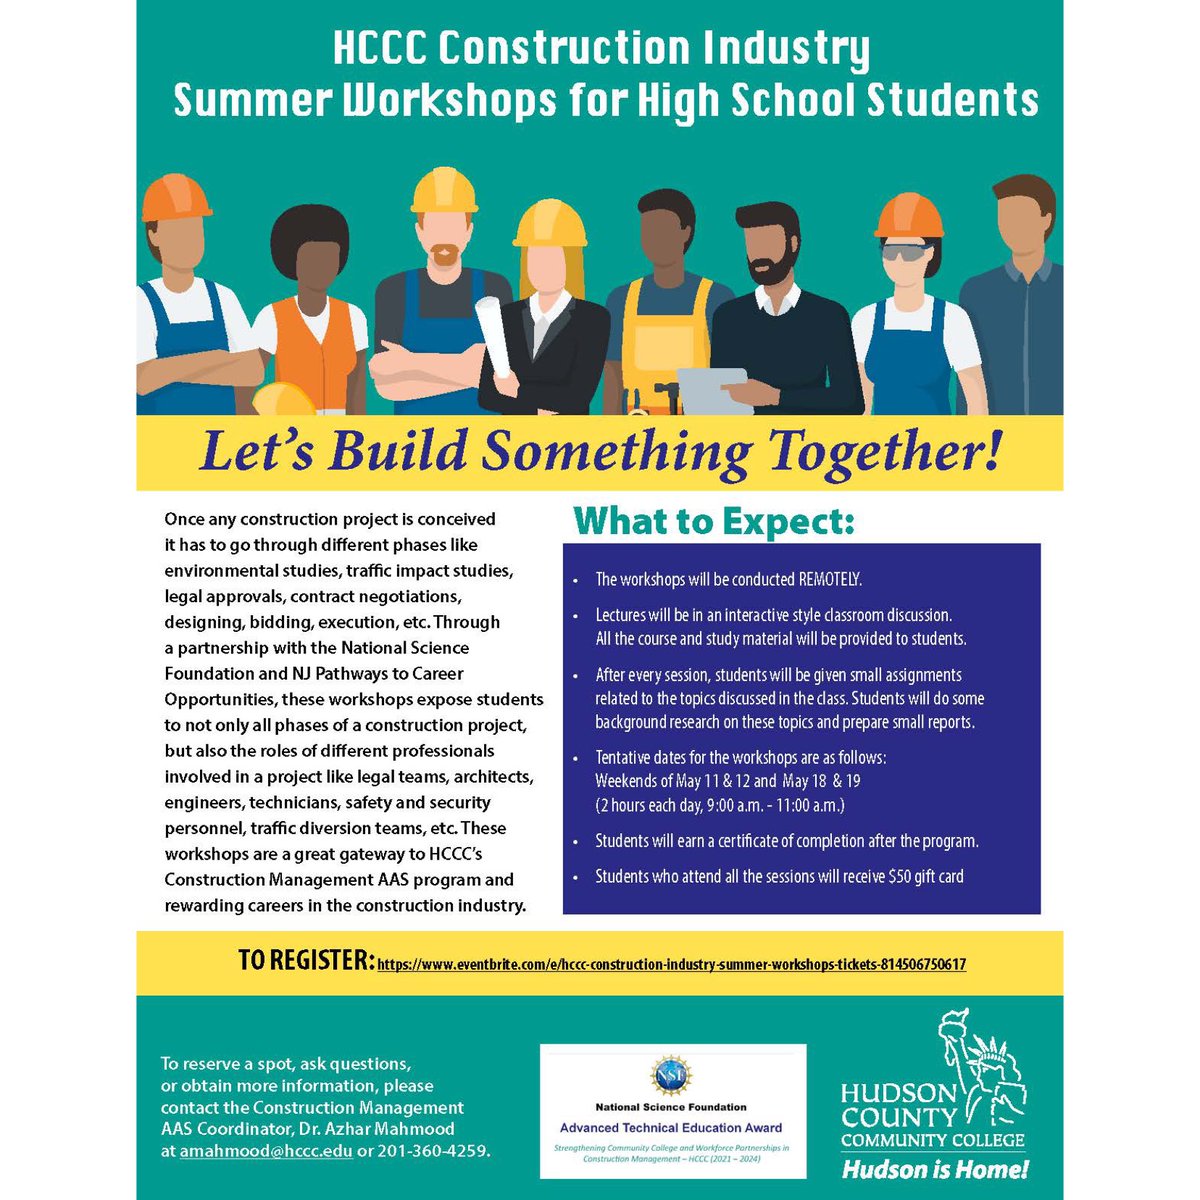 Let's Build Something Together! Join HCCC Construction Industry Workshops for #HighSchool Students this Summer. To reserve a spot or more info, please contact Dr. Azhar Mahmood at amahmood@hccc.edu or 201-360-4259. To Register: eventbrite.com/e/hccc-constru…